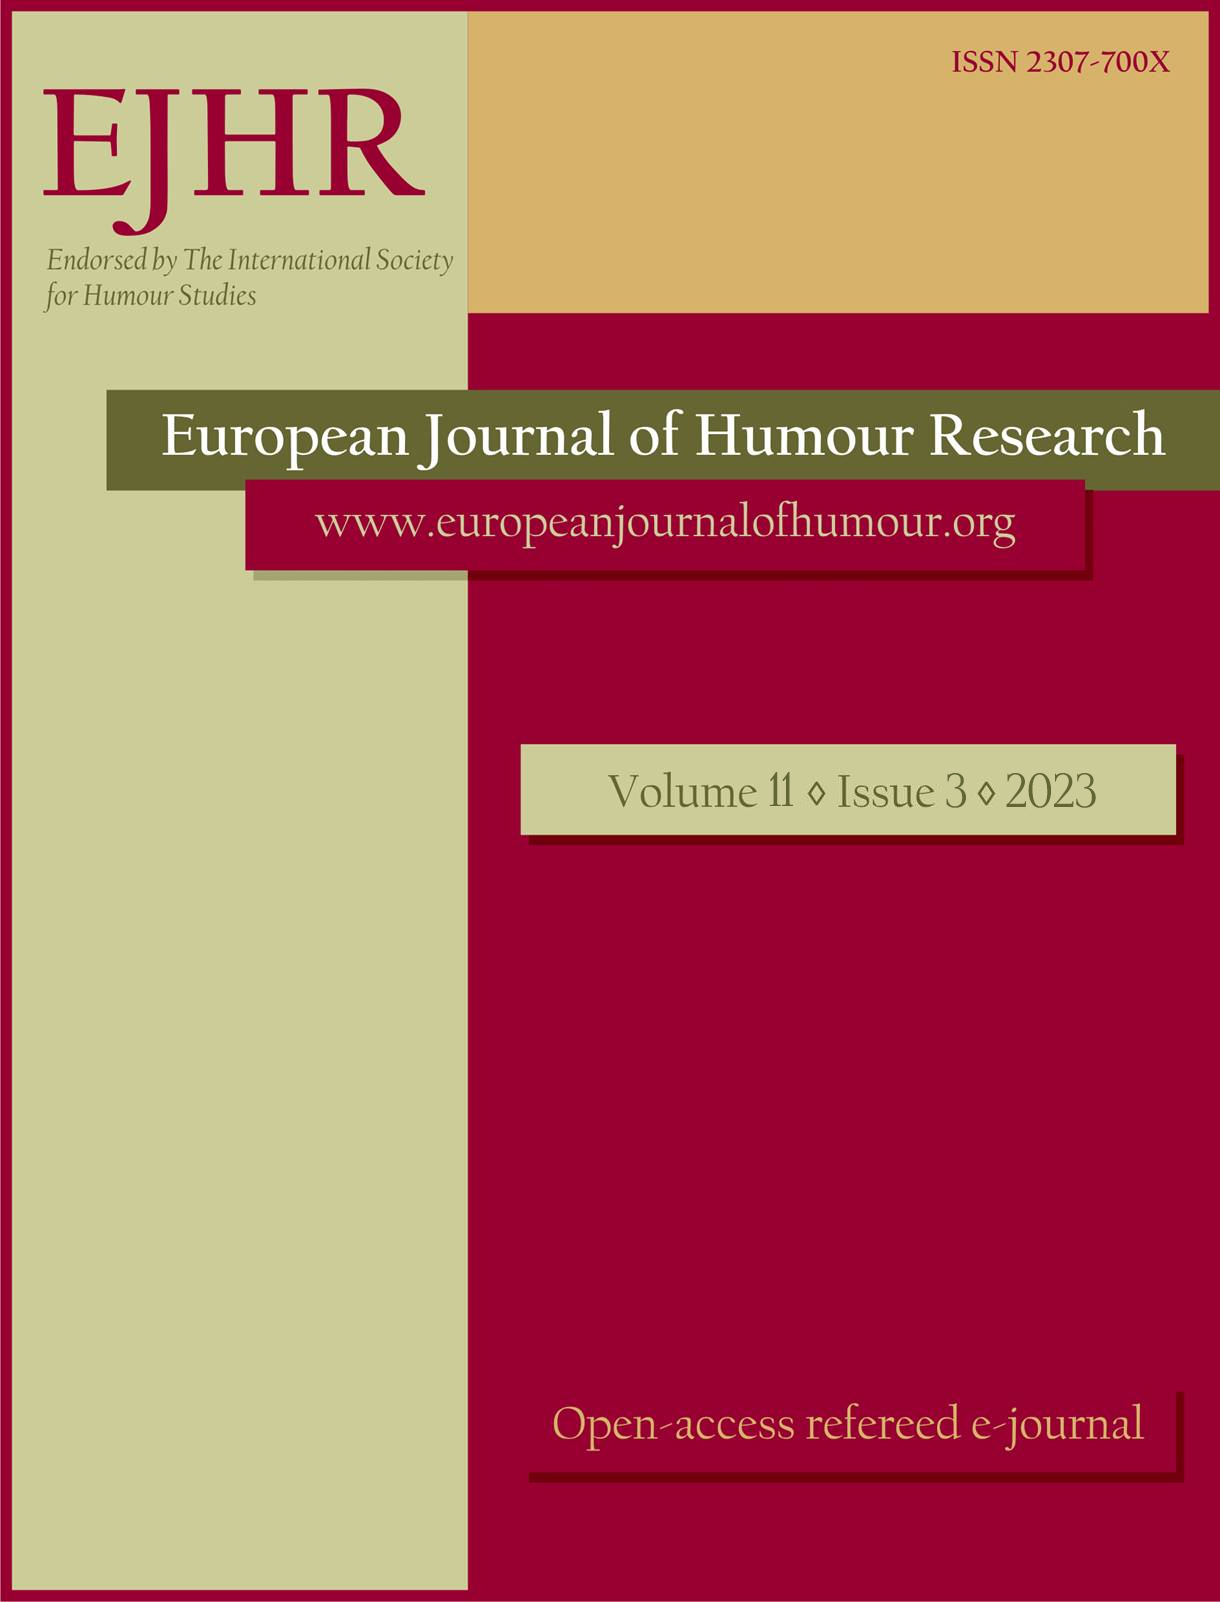 Forms and functions of jokes disseminated during the
Covid-19 pandemic in Jordan